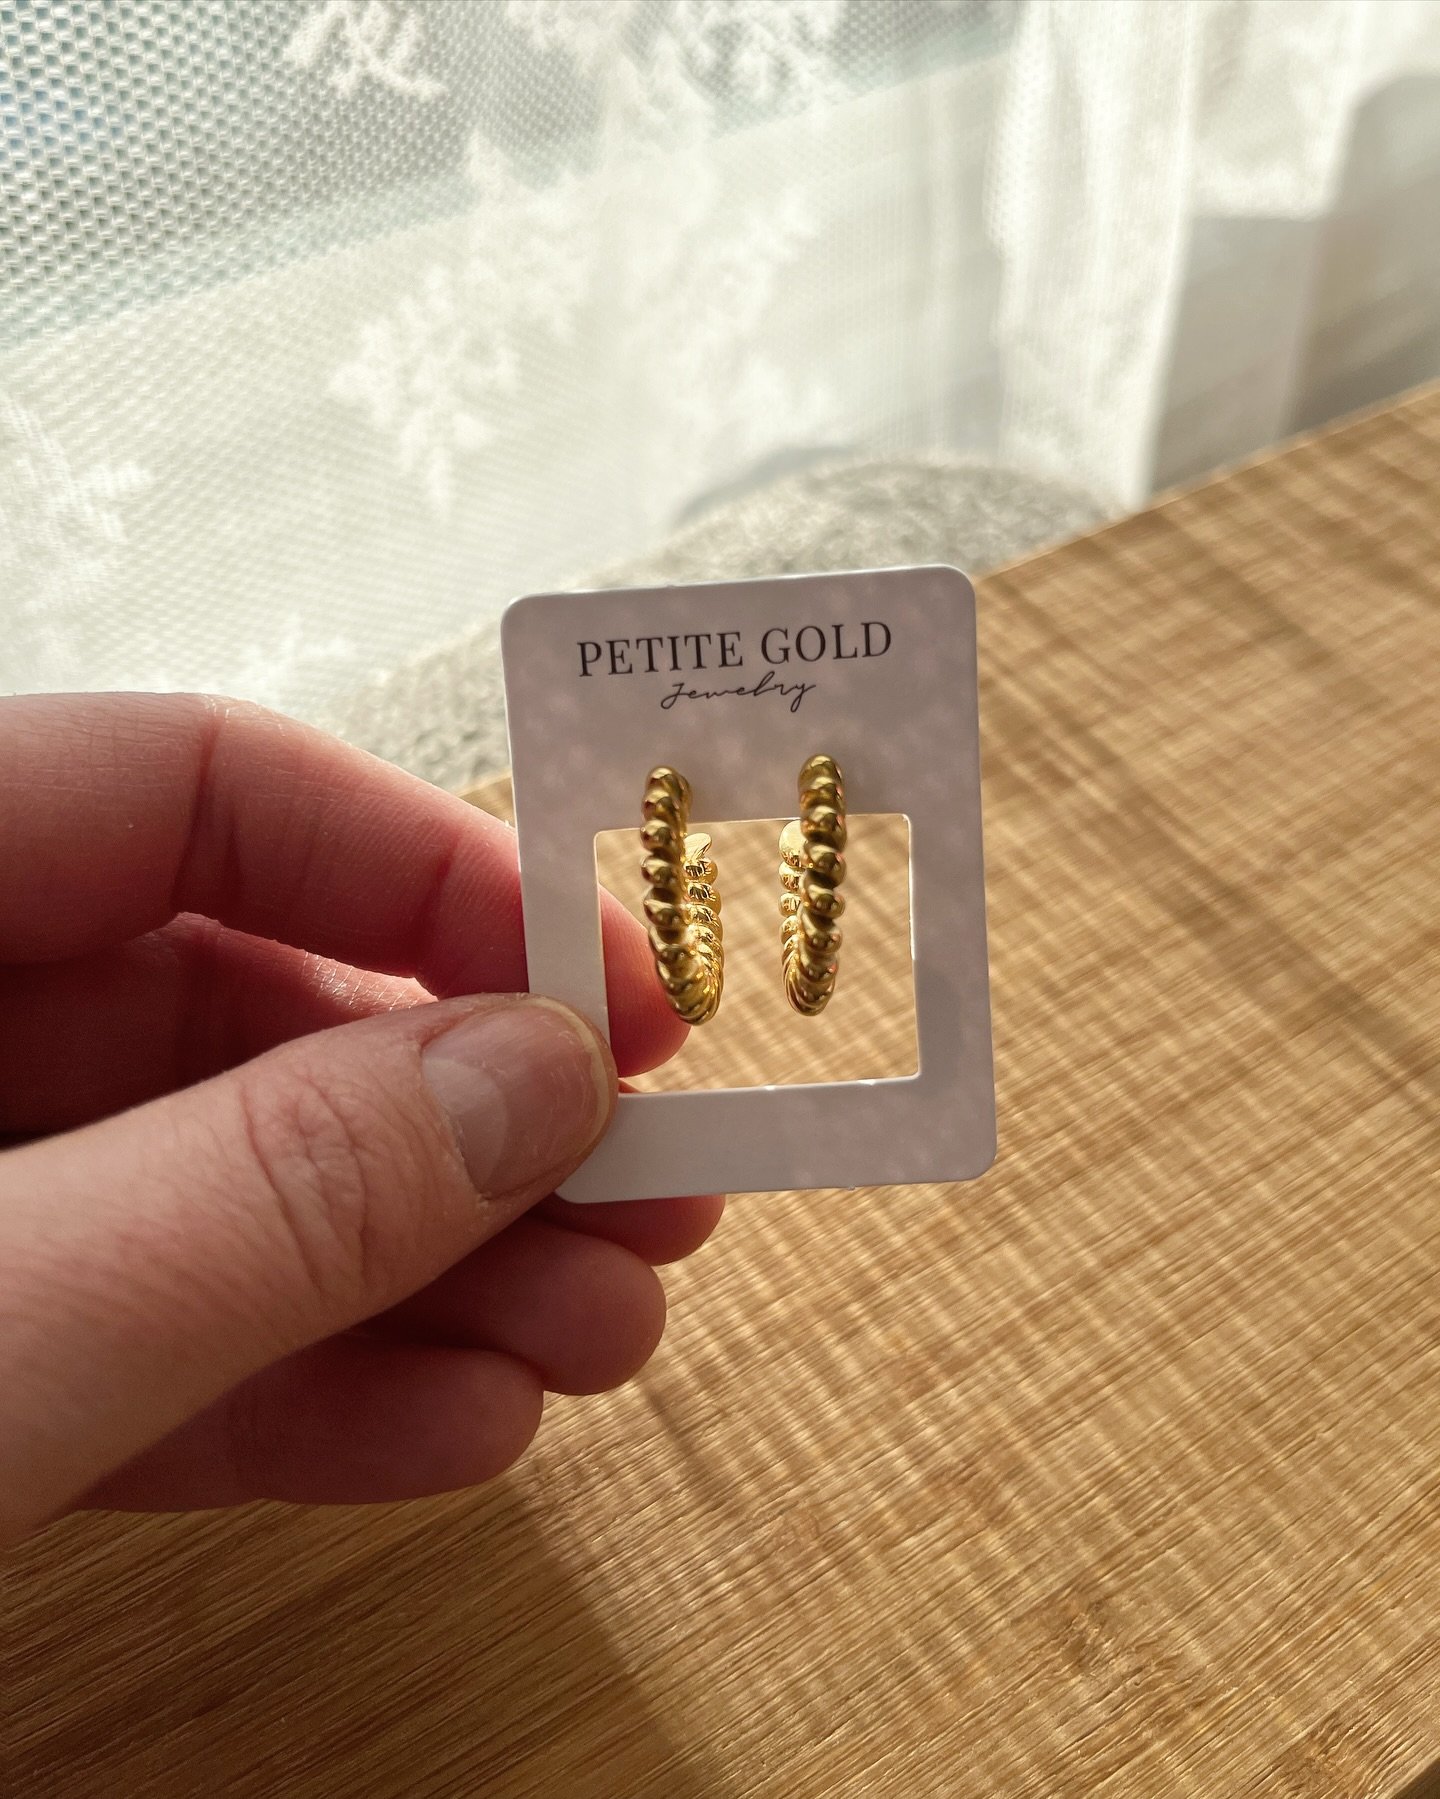 Petite Gold restock on the site! These pieces are made by an incredibly talented Calgarian artist and are not only beautiful, but also great quality. Stock up on some of these gorgeous staples today 💛💛